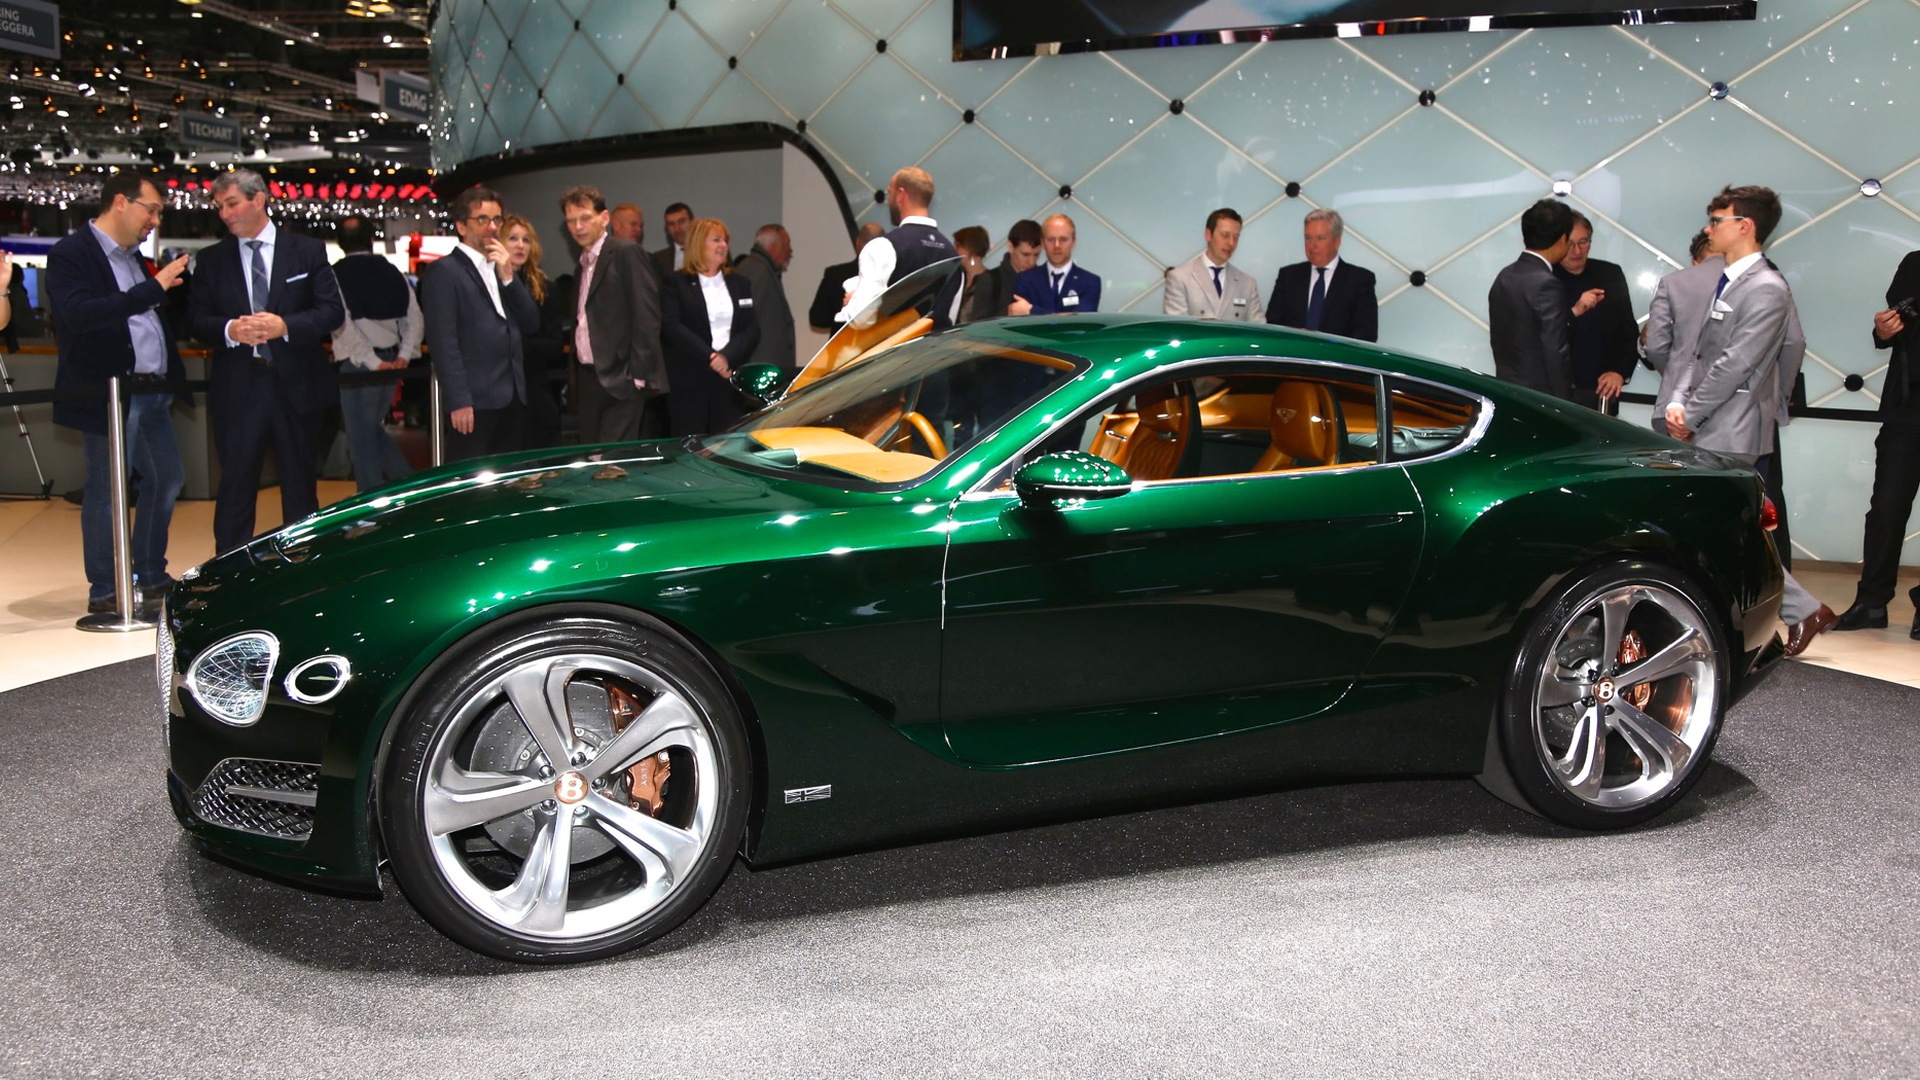 A Modern Masterpiece: The Bentley EXP 10 Speed 6 Concept